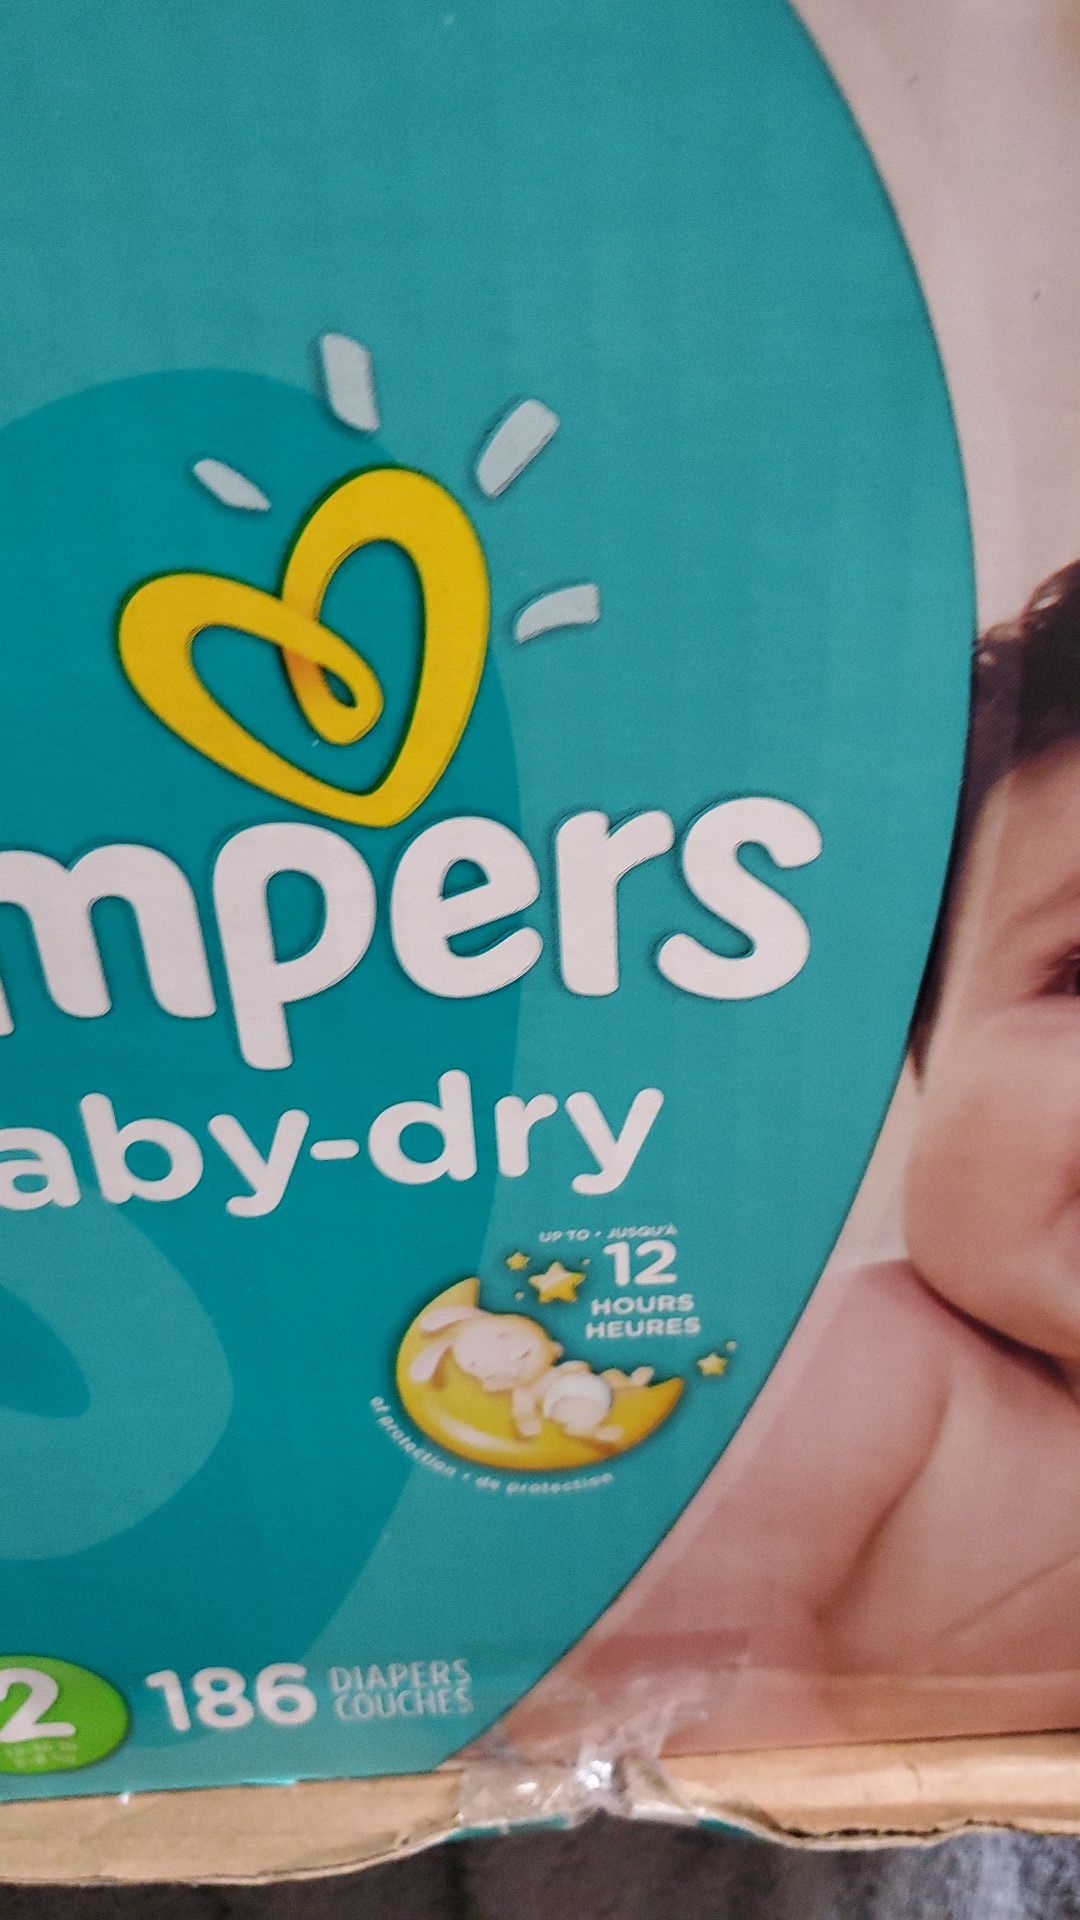 Pampers baby dry